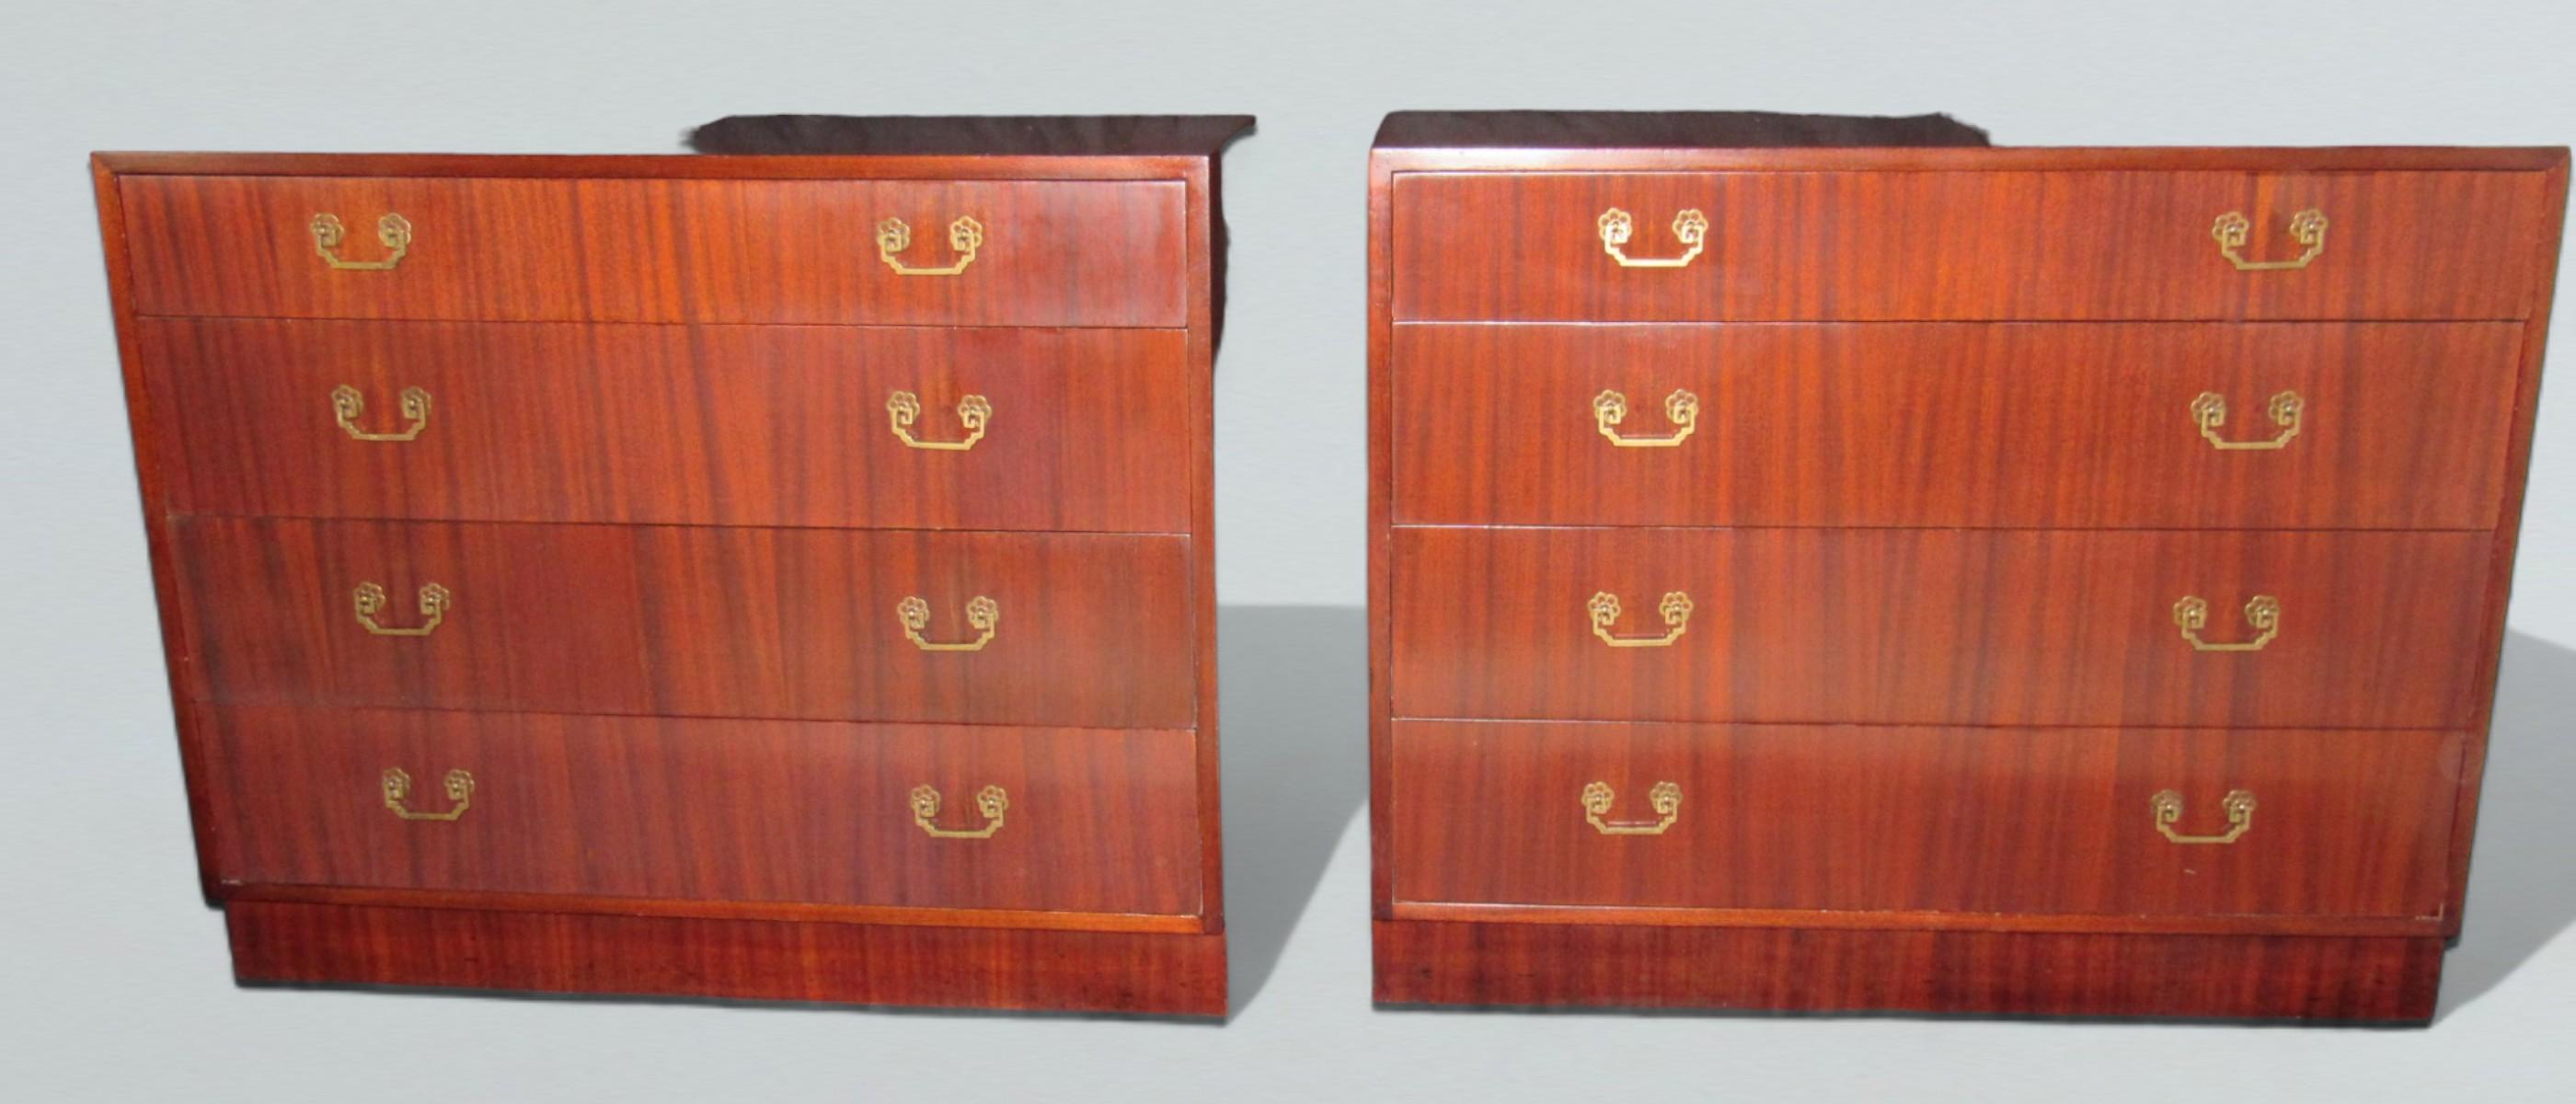 Veneer Mahogany Dressers Four-Drawer Matched Pair, 1940s For Sale